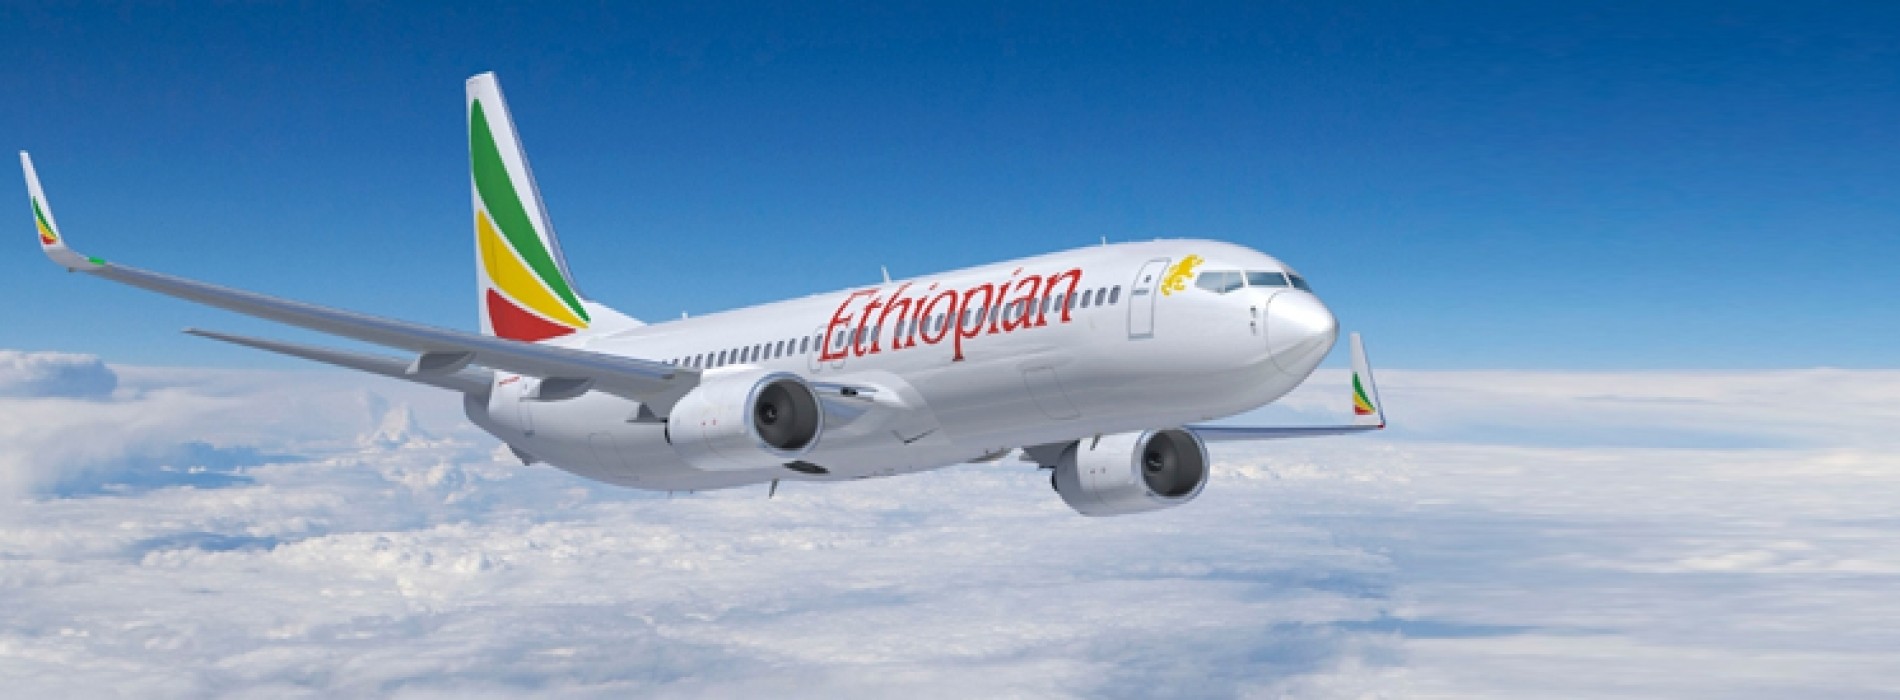 ETHIOPIAN AIRLINES STARTS DOUBLE DAILY FLIGHTS FROM NEW DELHI TO ADDIS ABABA